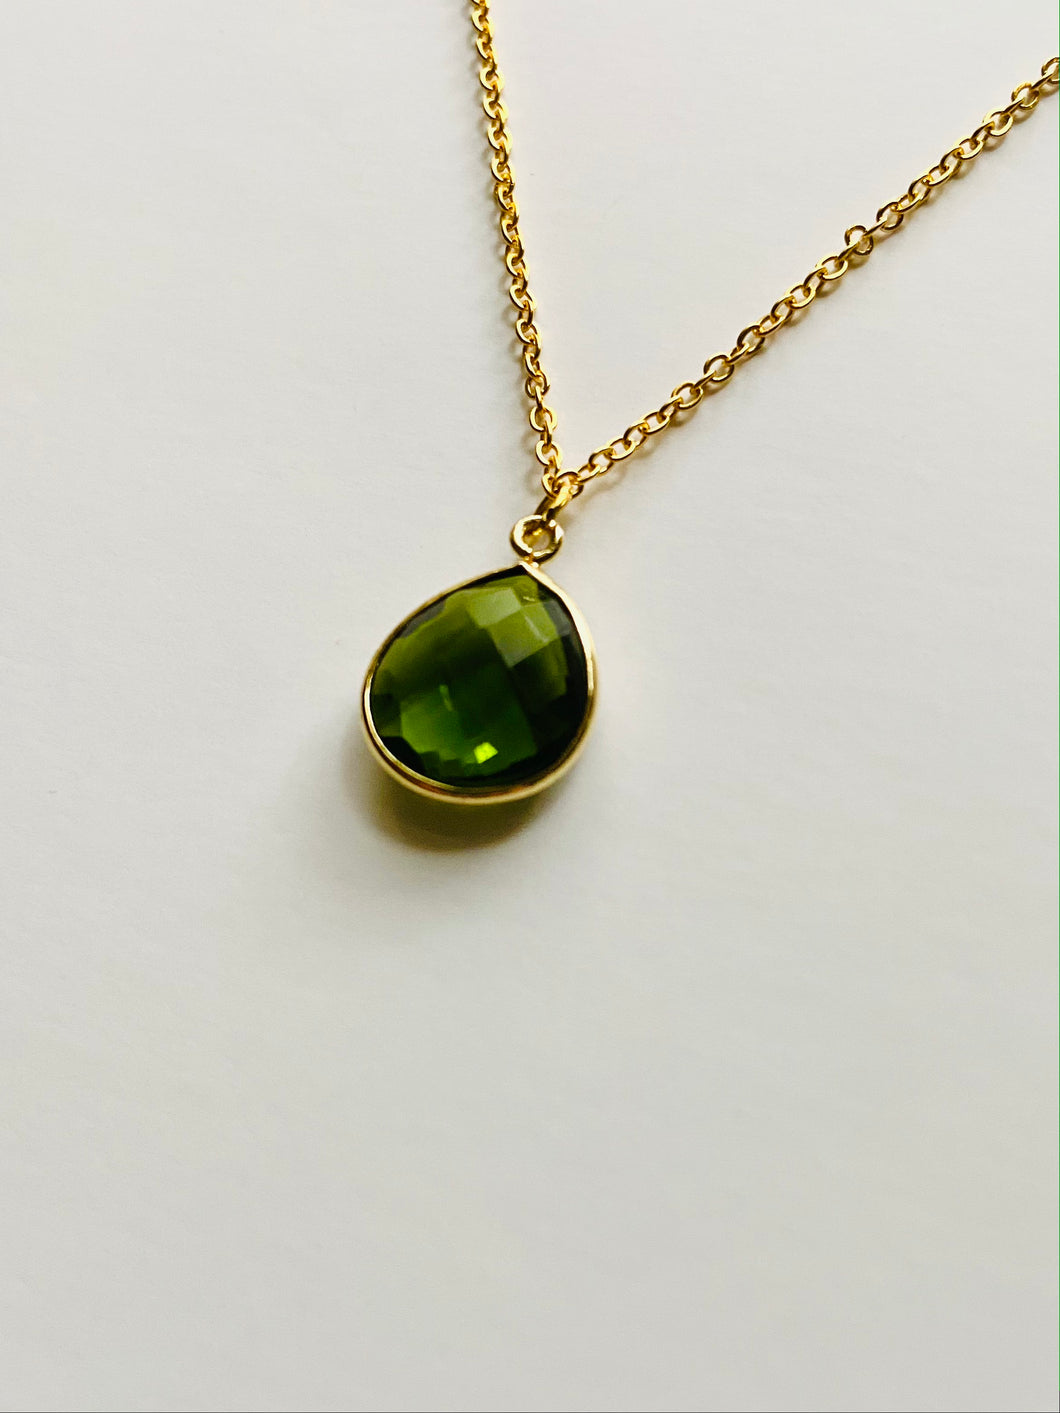 Birthstone Necklaces - August - Peridot